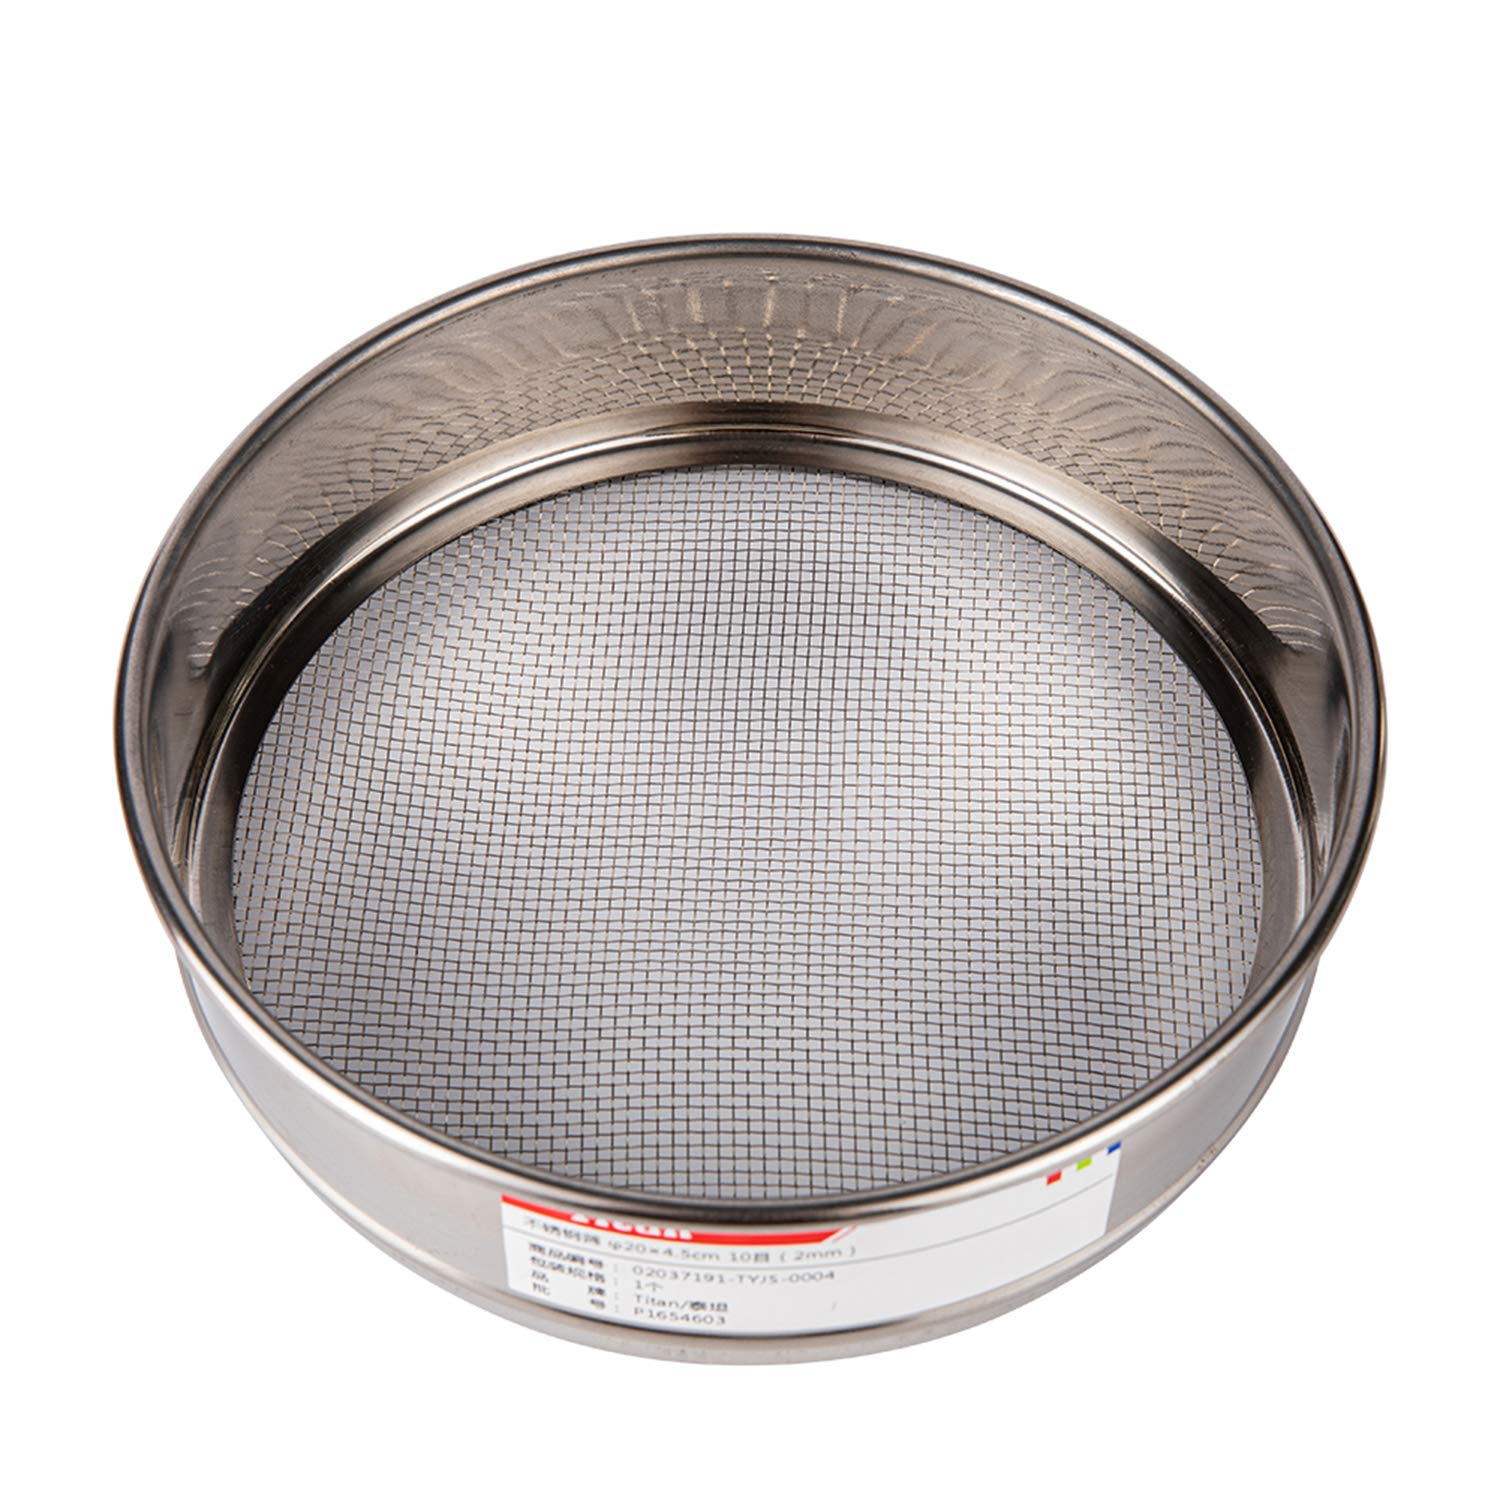  Wholesale 304 Stainless Steel Test Sieves, Lab Standard Test Sieve,φ20×4.5cm 6 Mesh 304 Stainless Steel Wire Cloth（4mm）